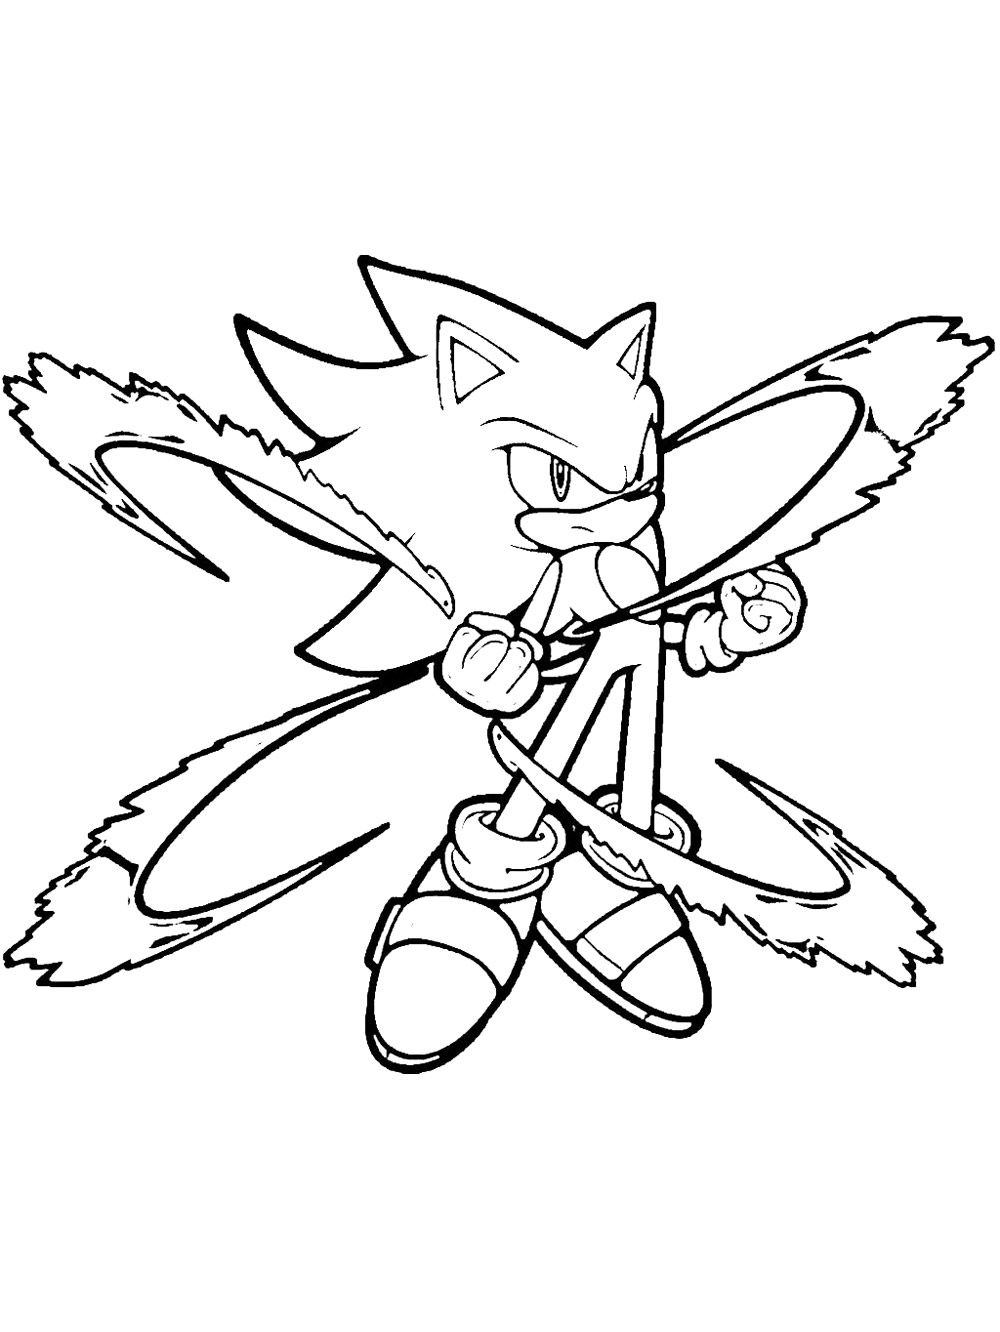 Sonic the hedgehog coloring pages hedgehog colors coloring pages coloring pages for boys